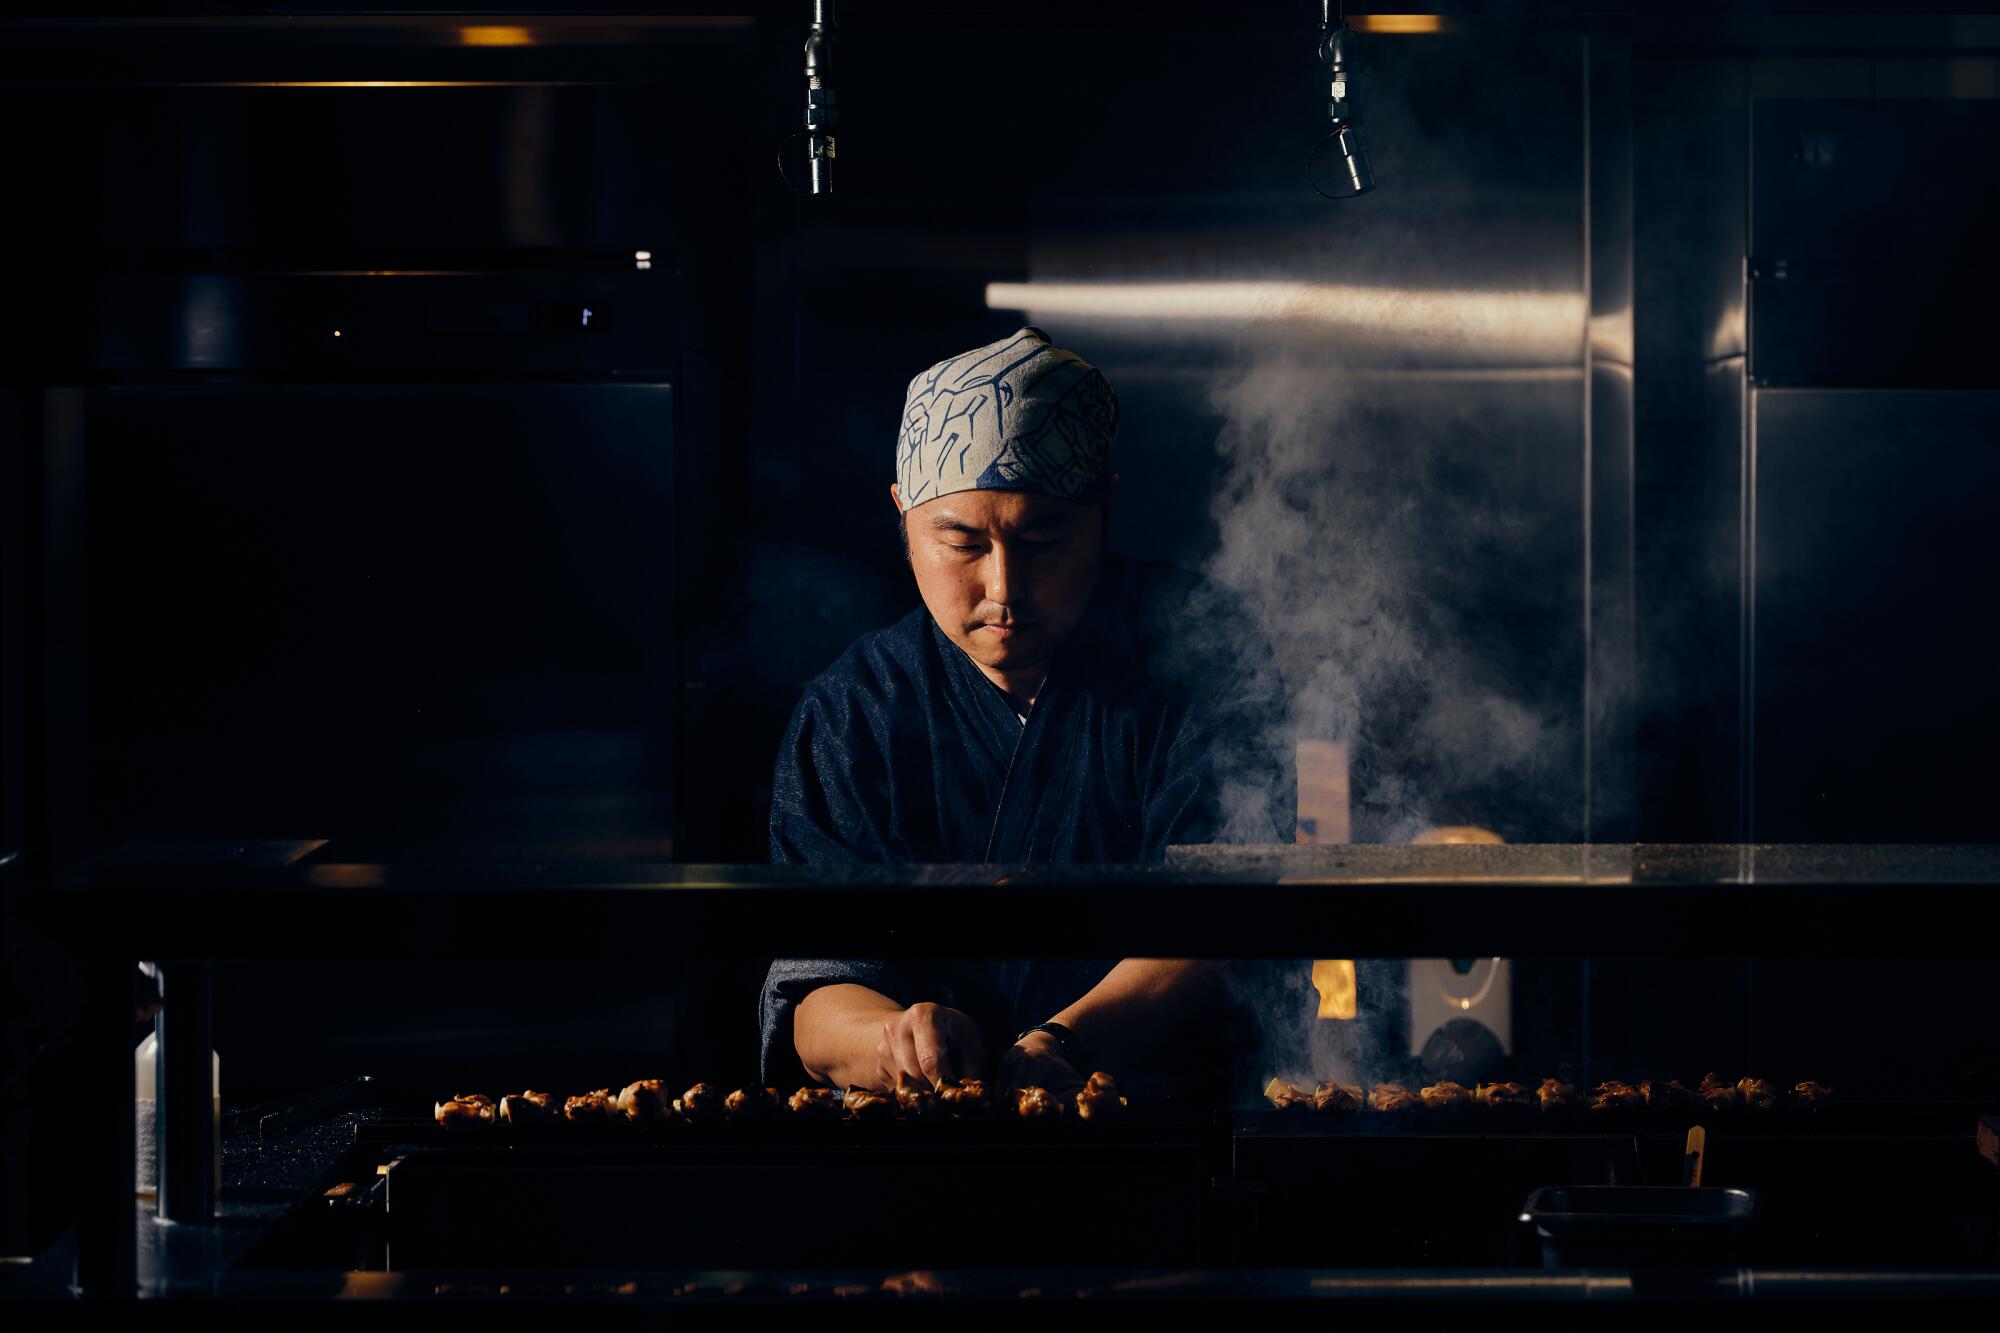 A man faces a line of meat skewers on a smoking grill.